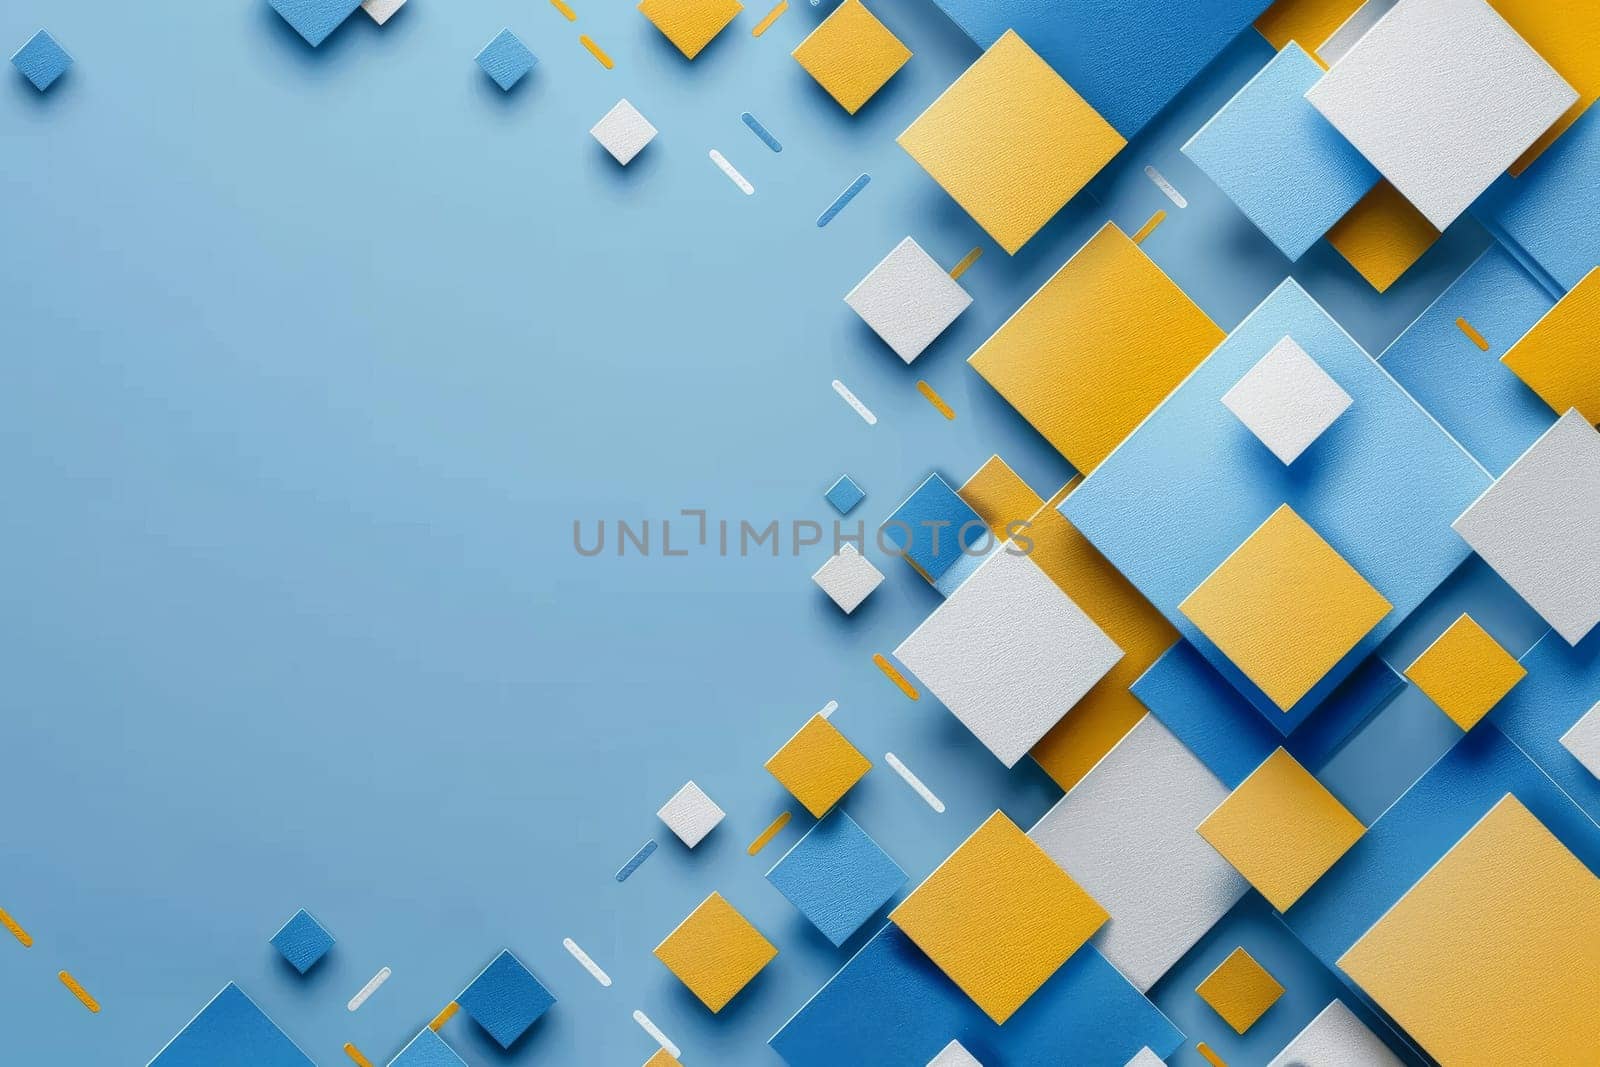 Geometric square blue and yellow background.